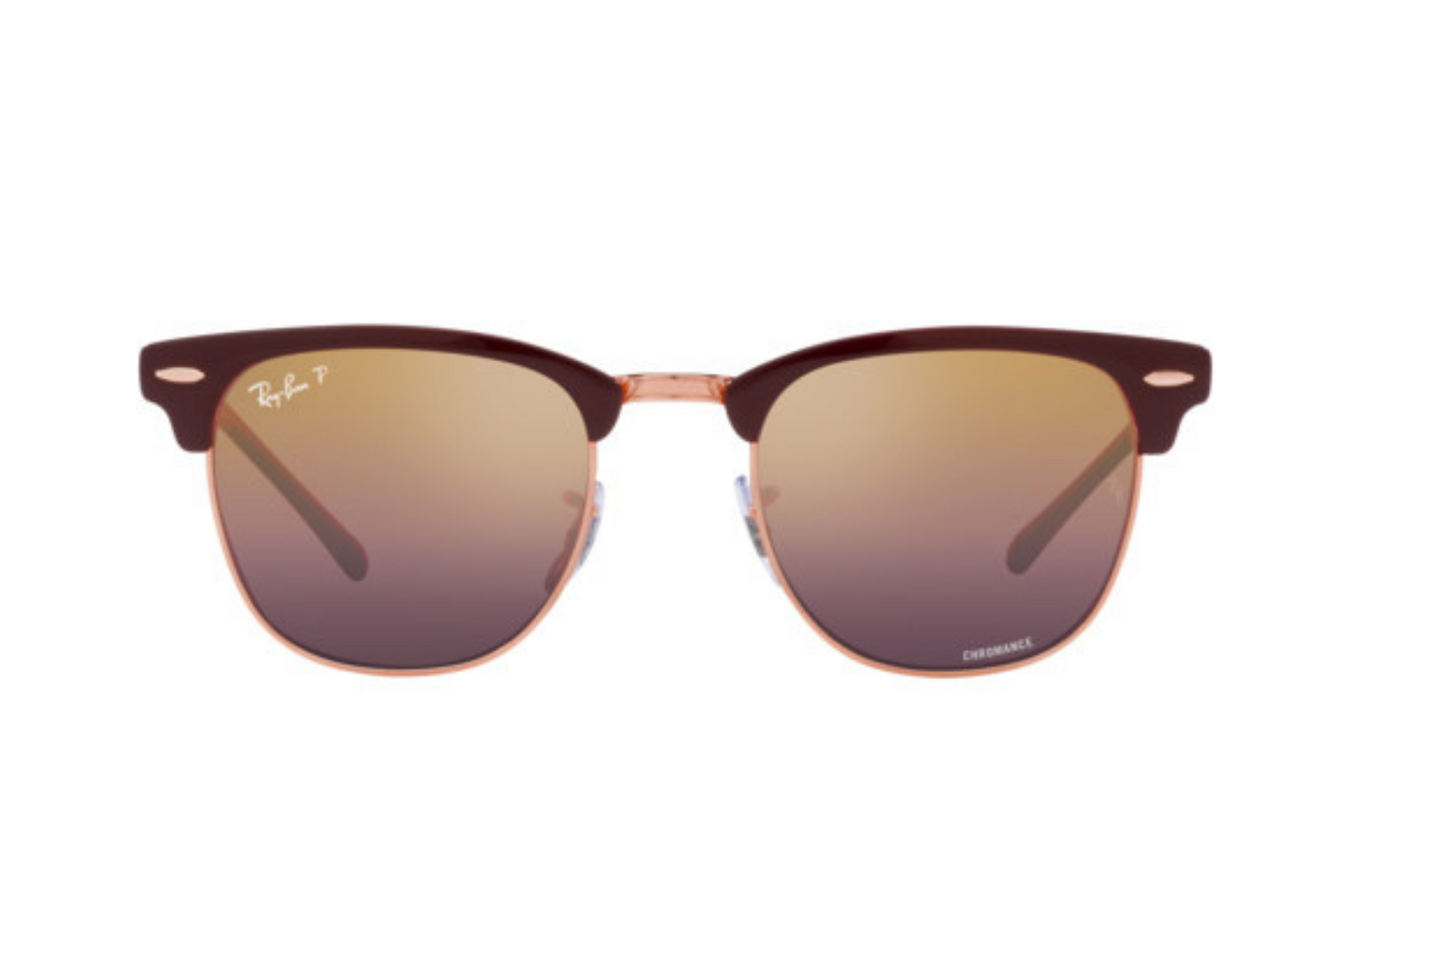 RAY-BAN CLUBMASTER METAL RB3716 9253/G9